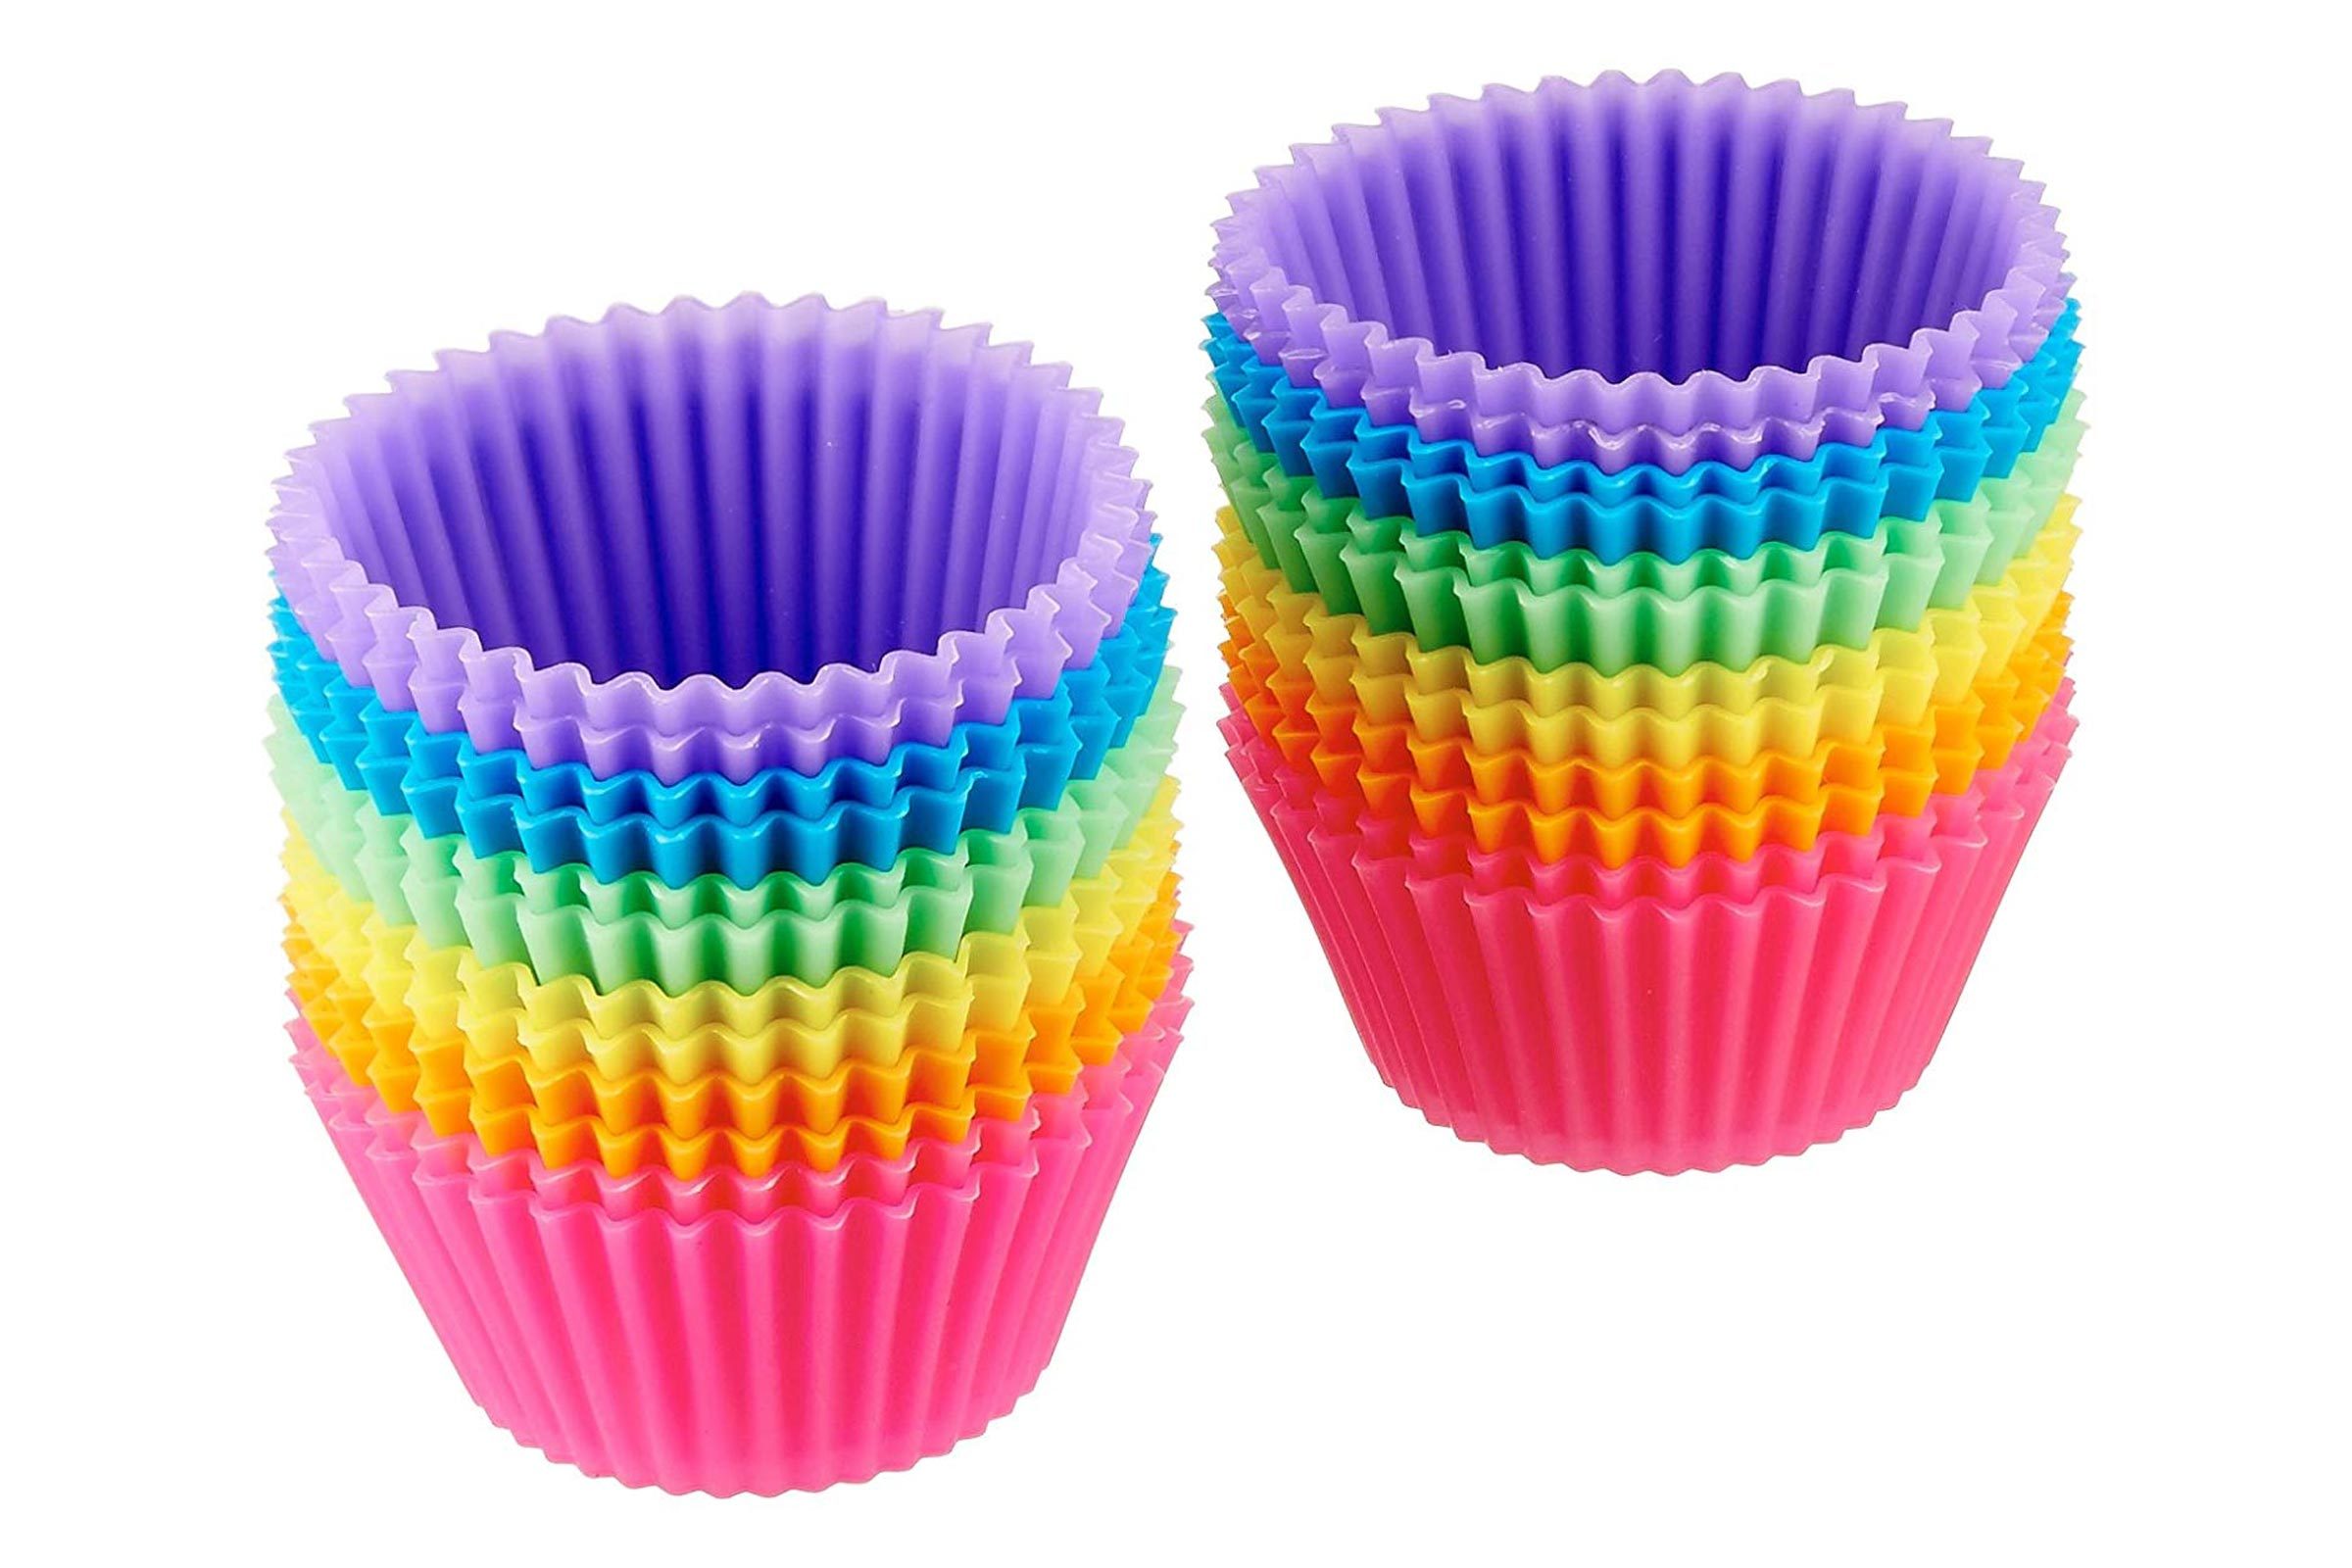 24 Reusable Cupcake Liners FREE SHIPPING Silicone Cupcake Baking Cups Silver 